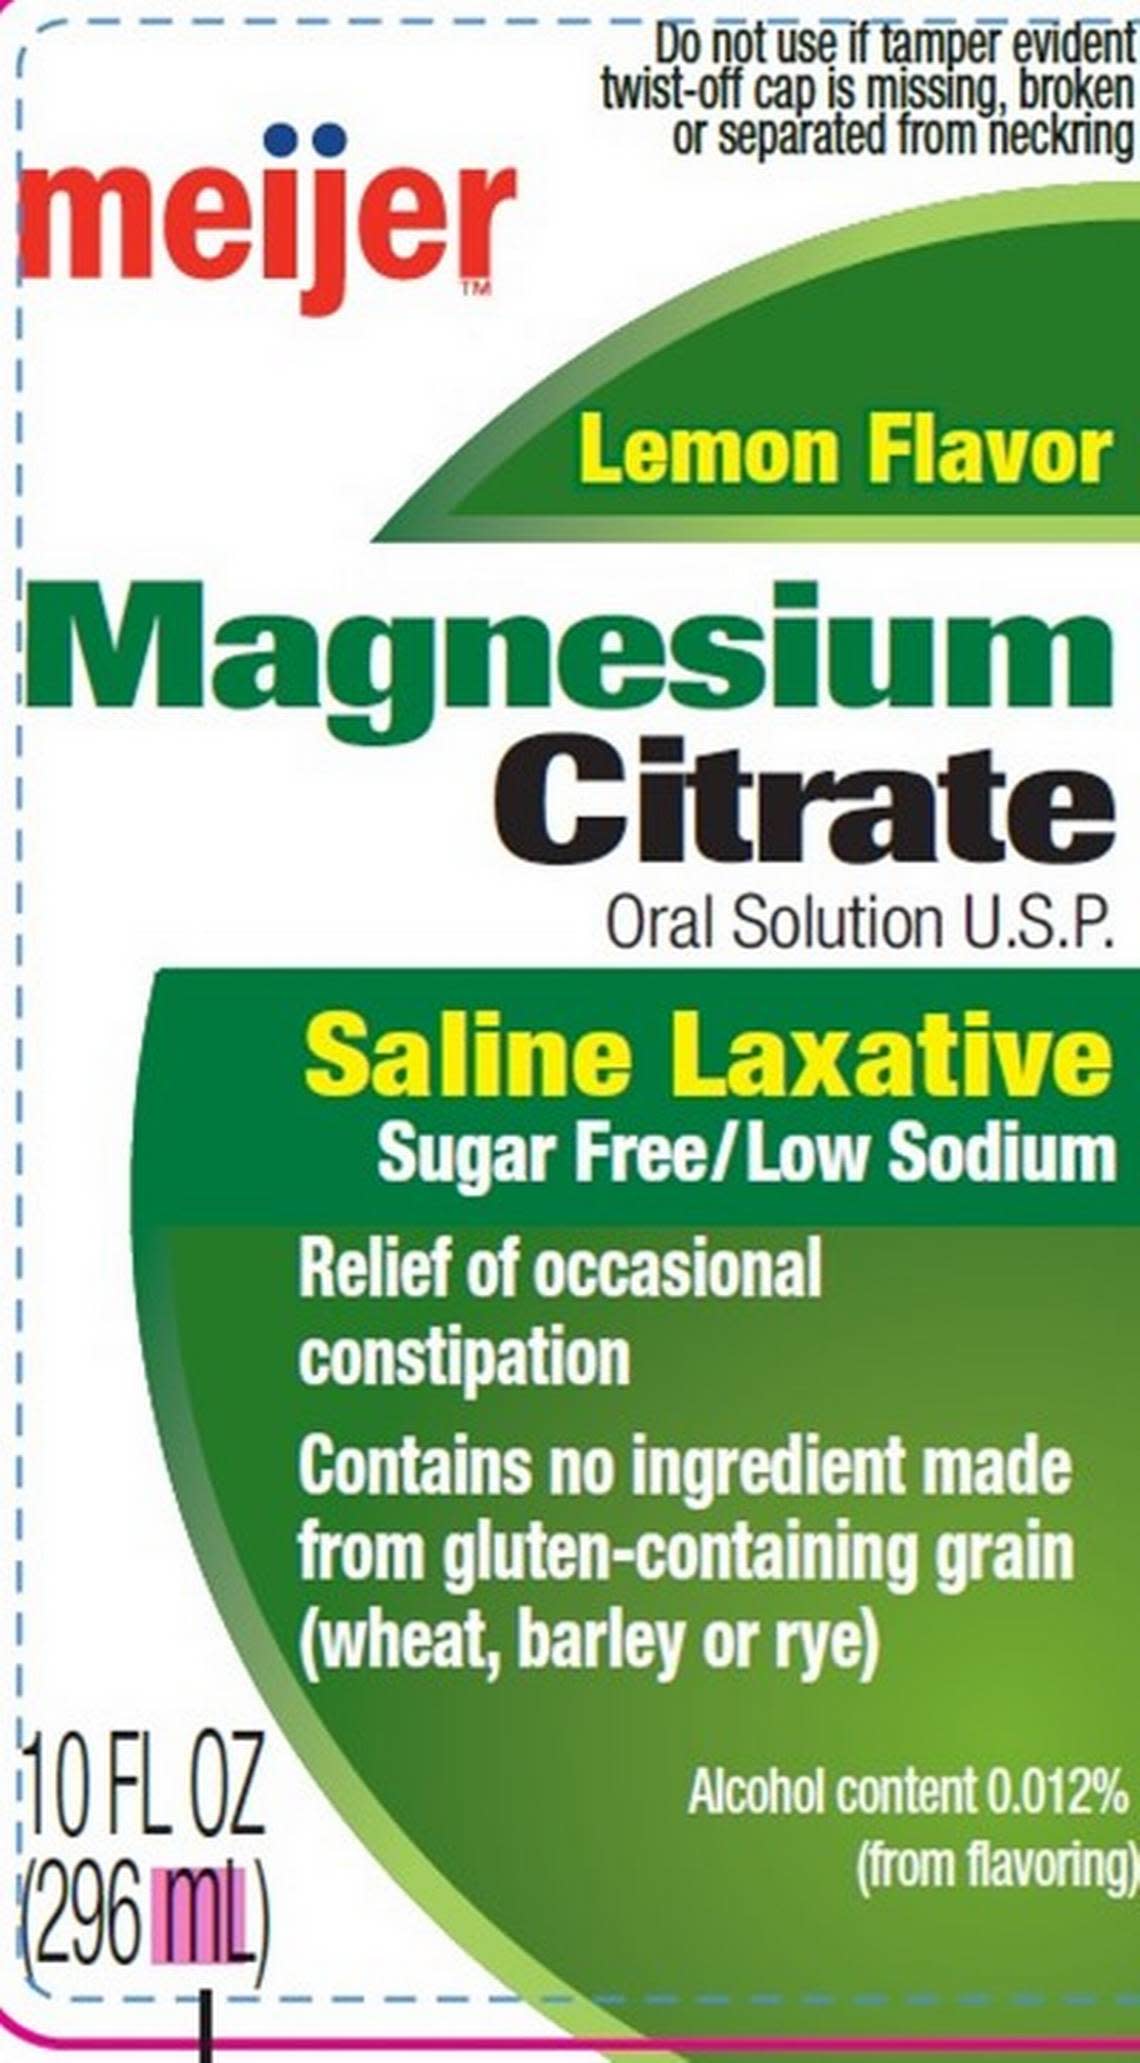 Meijer Magnesium Citrate laxative